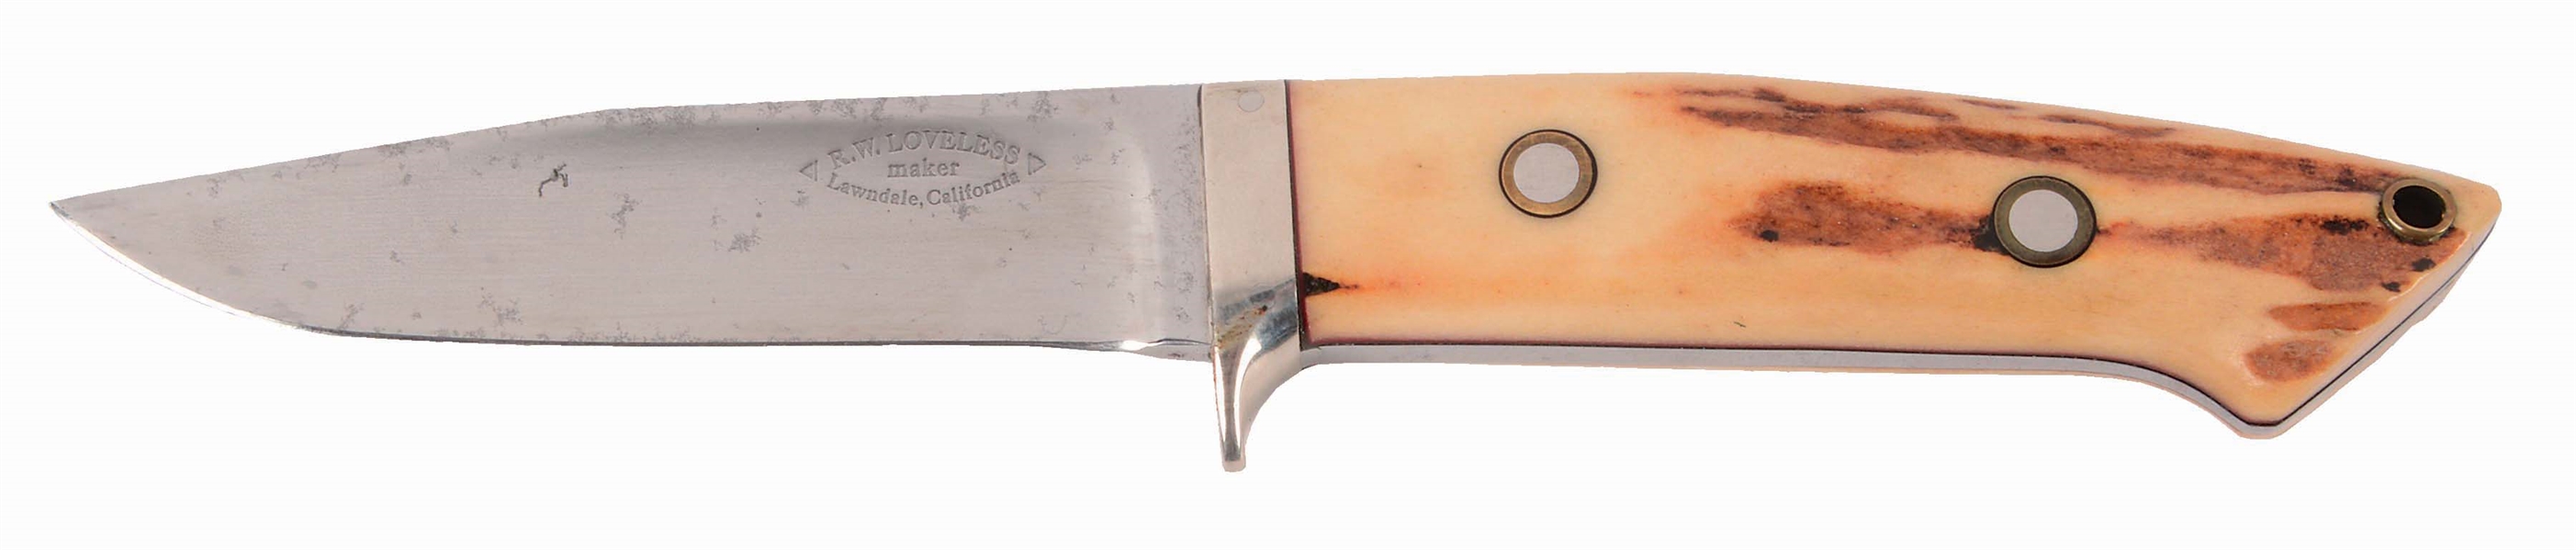 RARE AND DESIRABLE R.W. LOVELESS LAWNDALE CA, DROP POINT SKINNER WITH STAG GRIPS